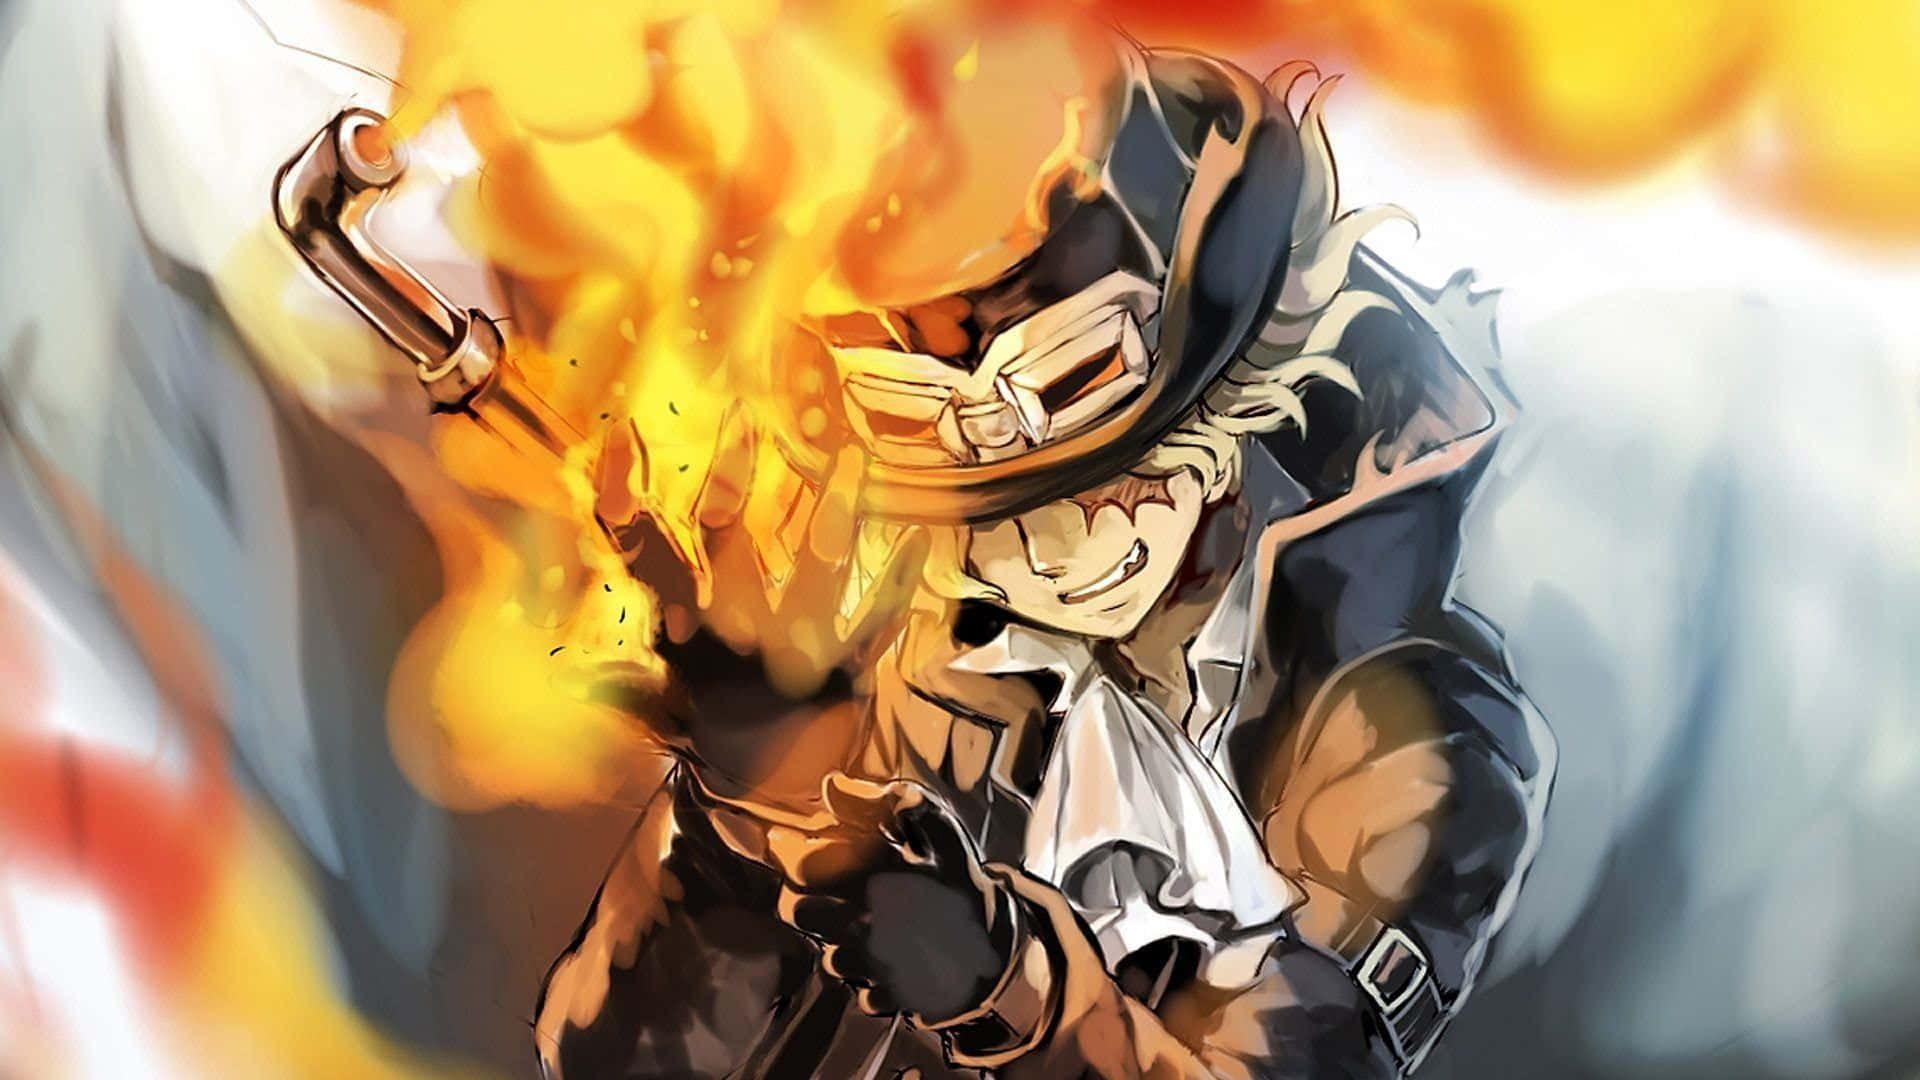 Sabo stands tall to fight for what is important Wallpaper